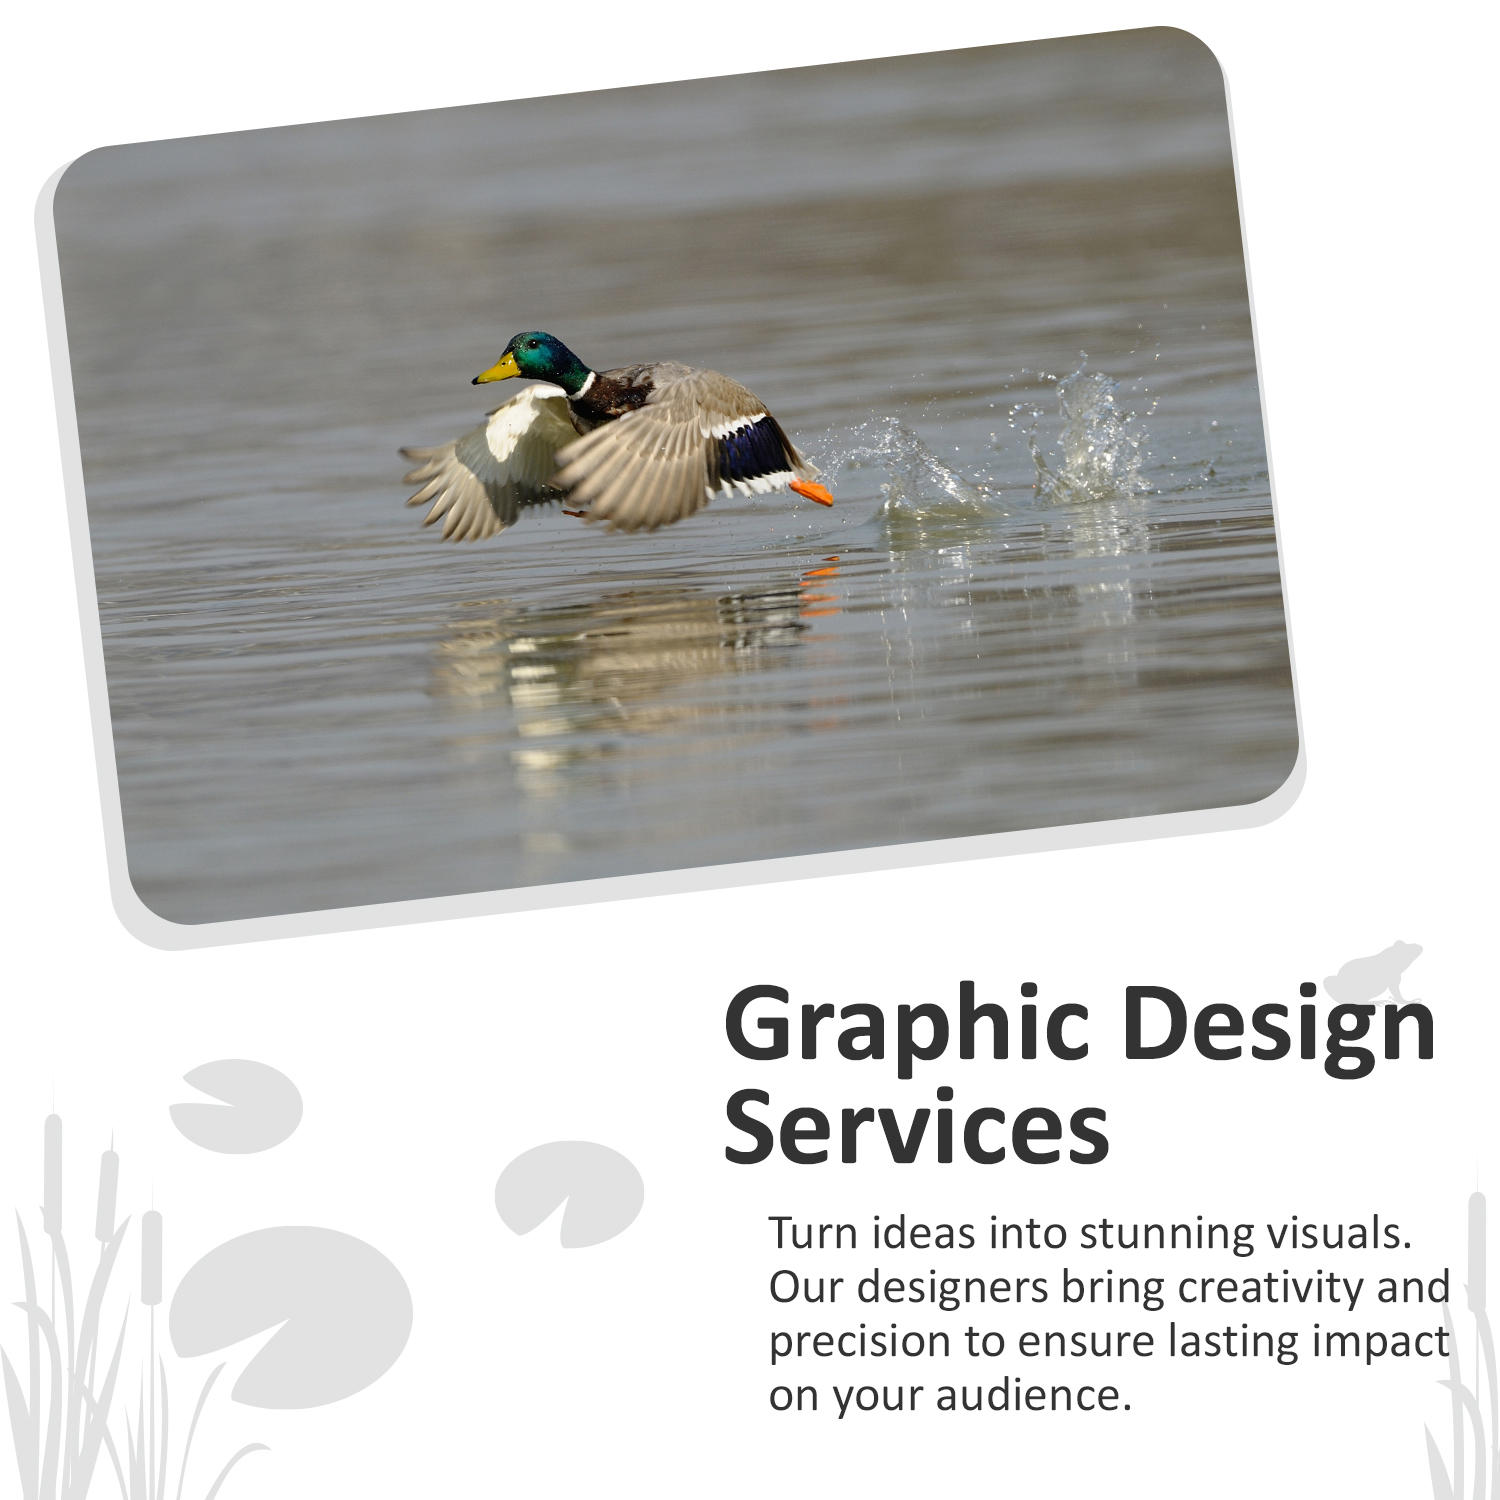 Our designers can create consistent on-brand graphics for all your company needs. Learn More: https://paraduxmedia.com